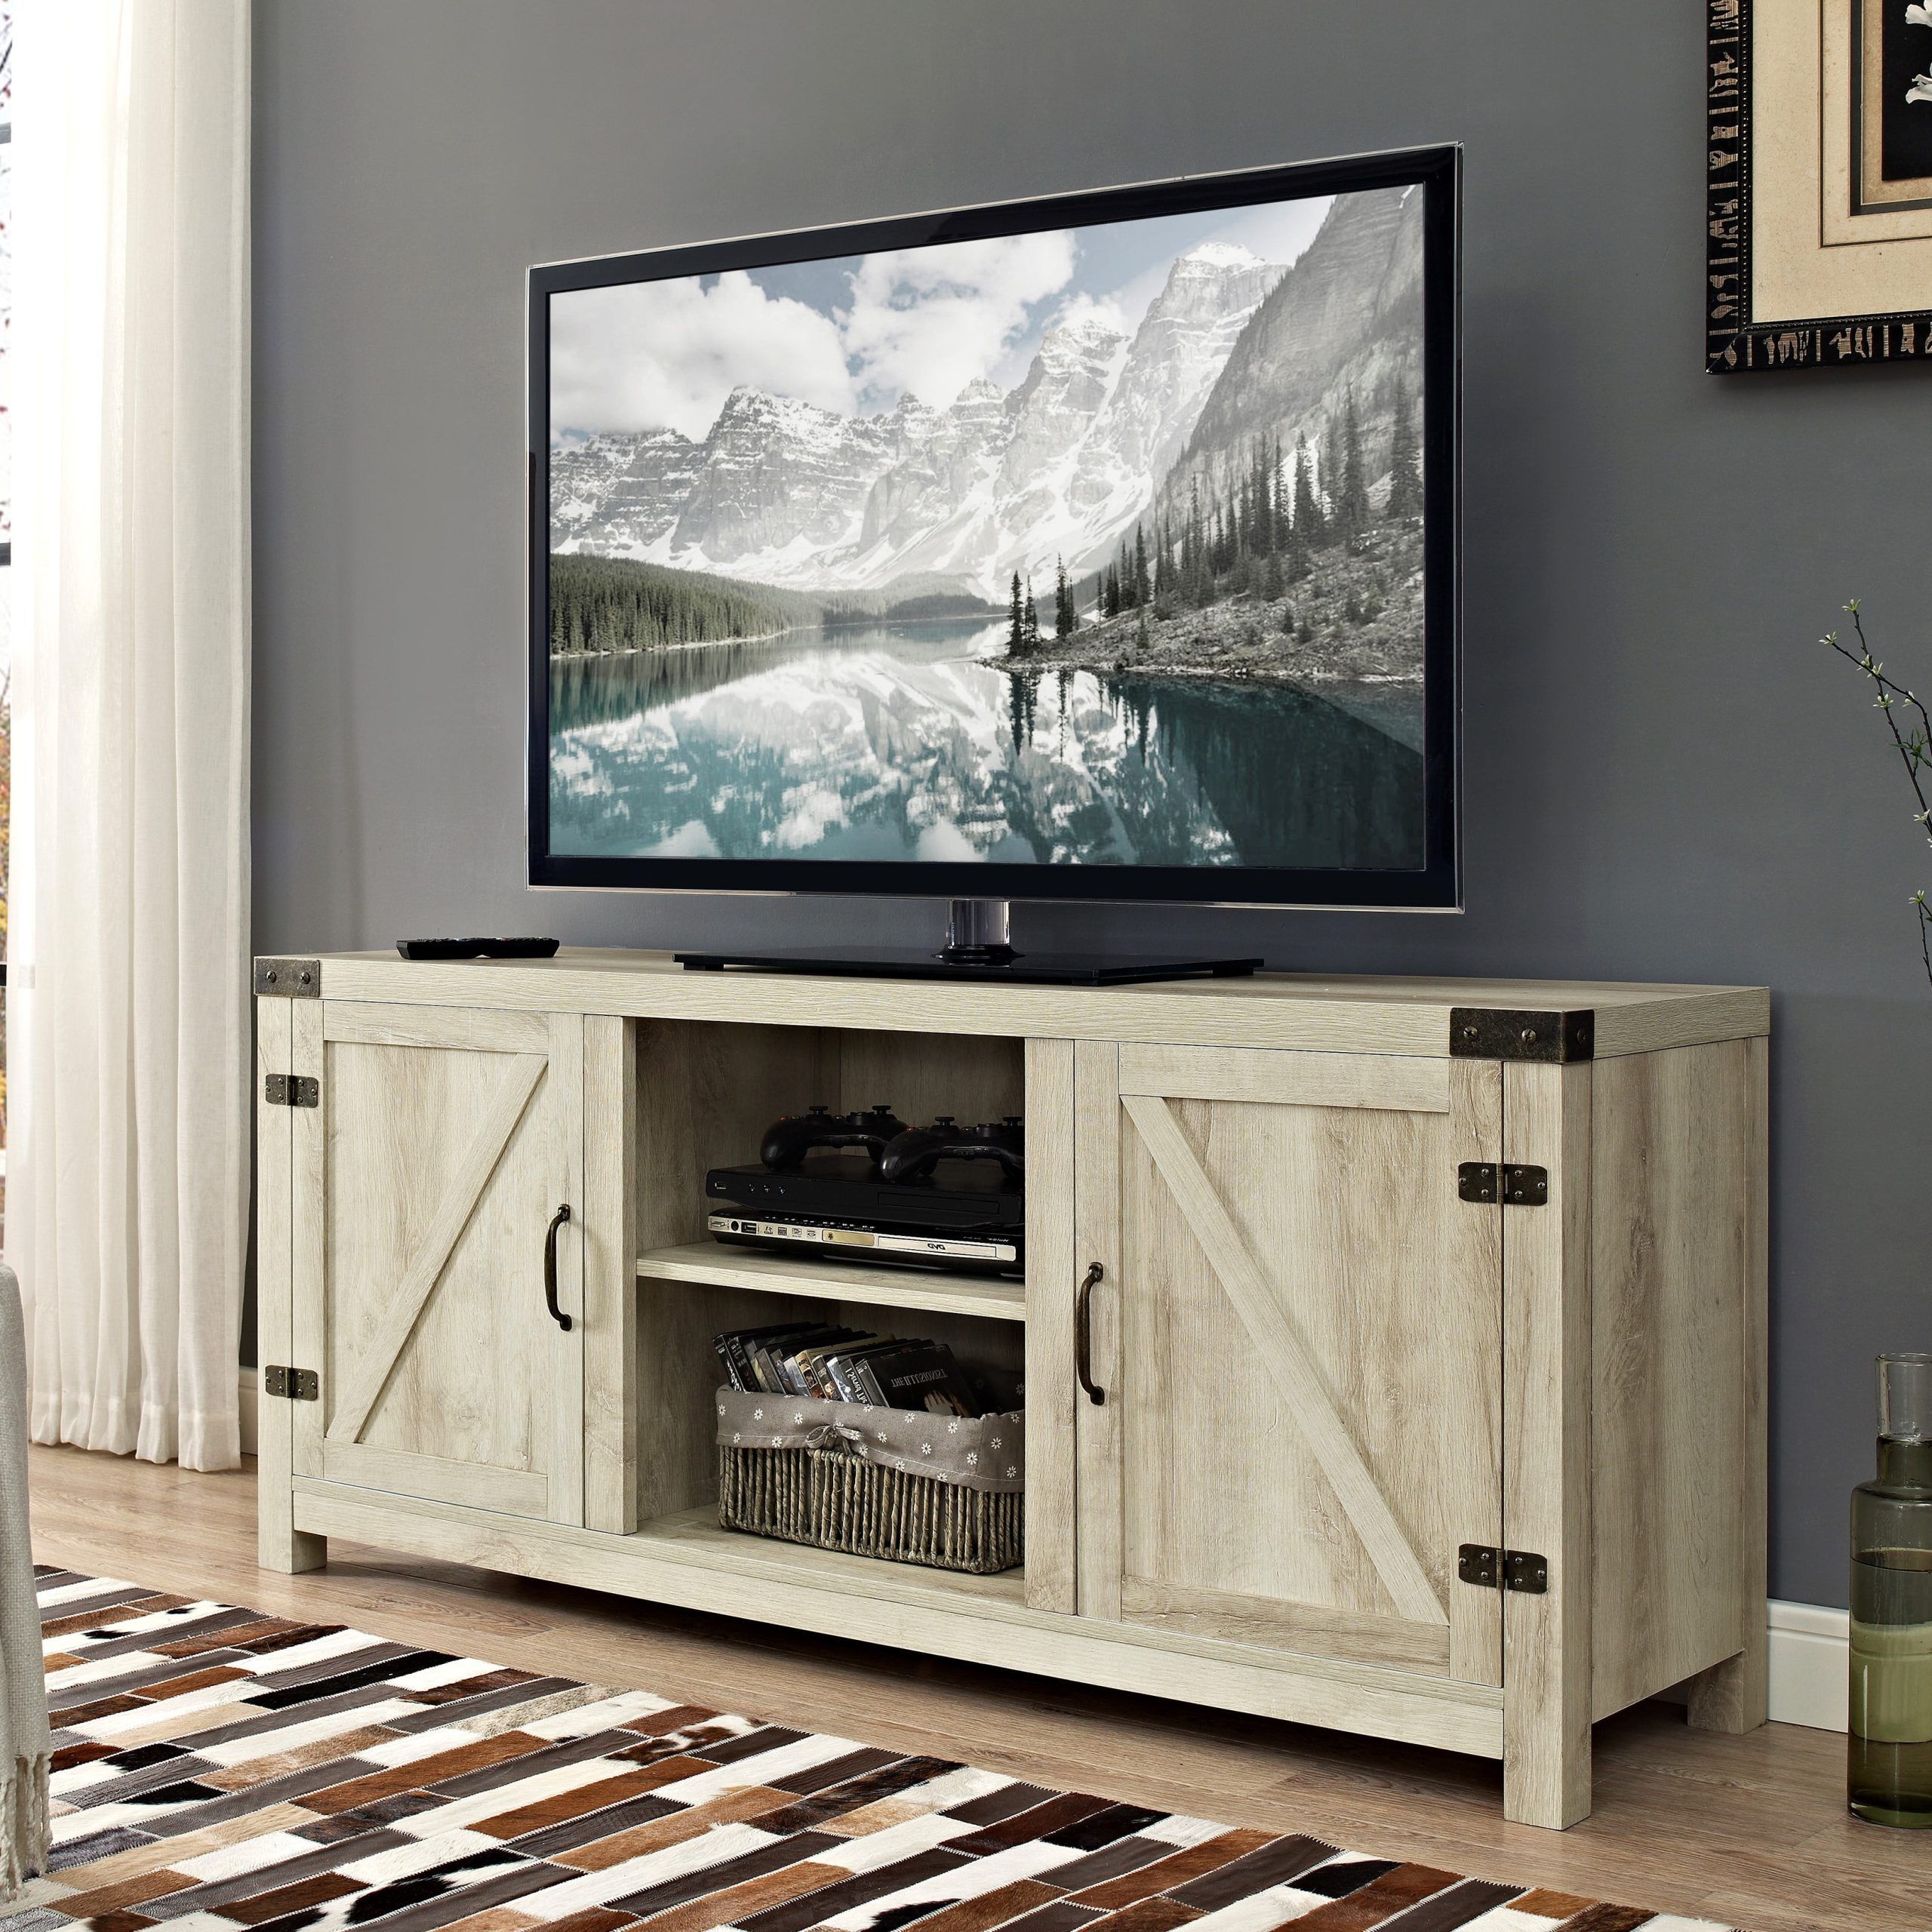 Modern Farmhouse Rustic Tv Stands In Popular Woven Paths Modern Farmhouse Barn Door Tv Stand For Tvs Up To  (View 4 of 15)